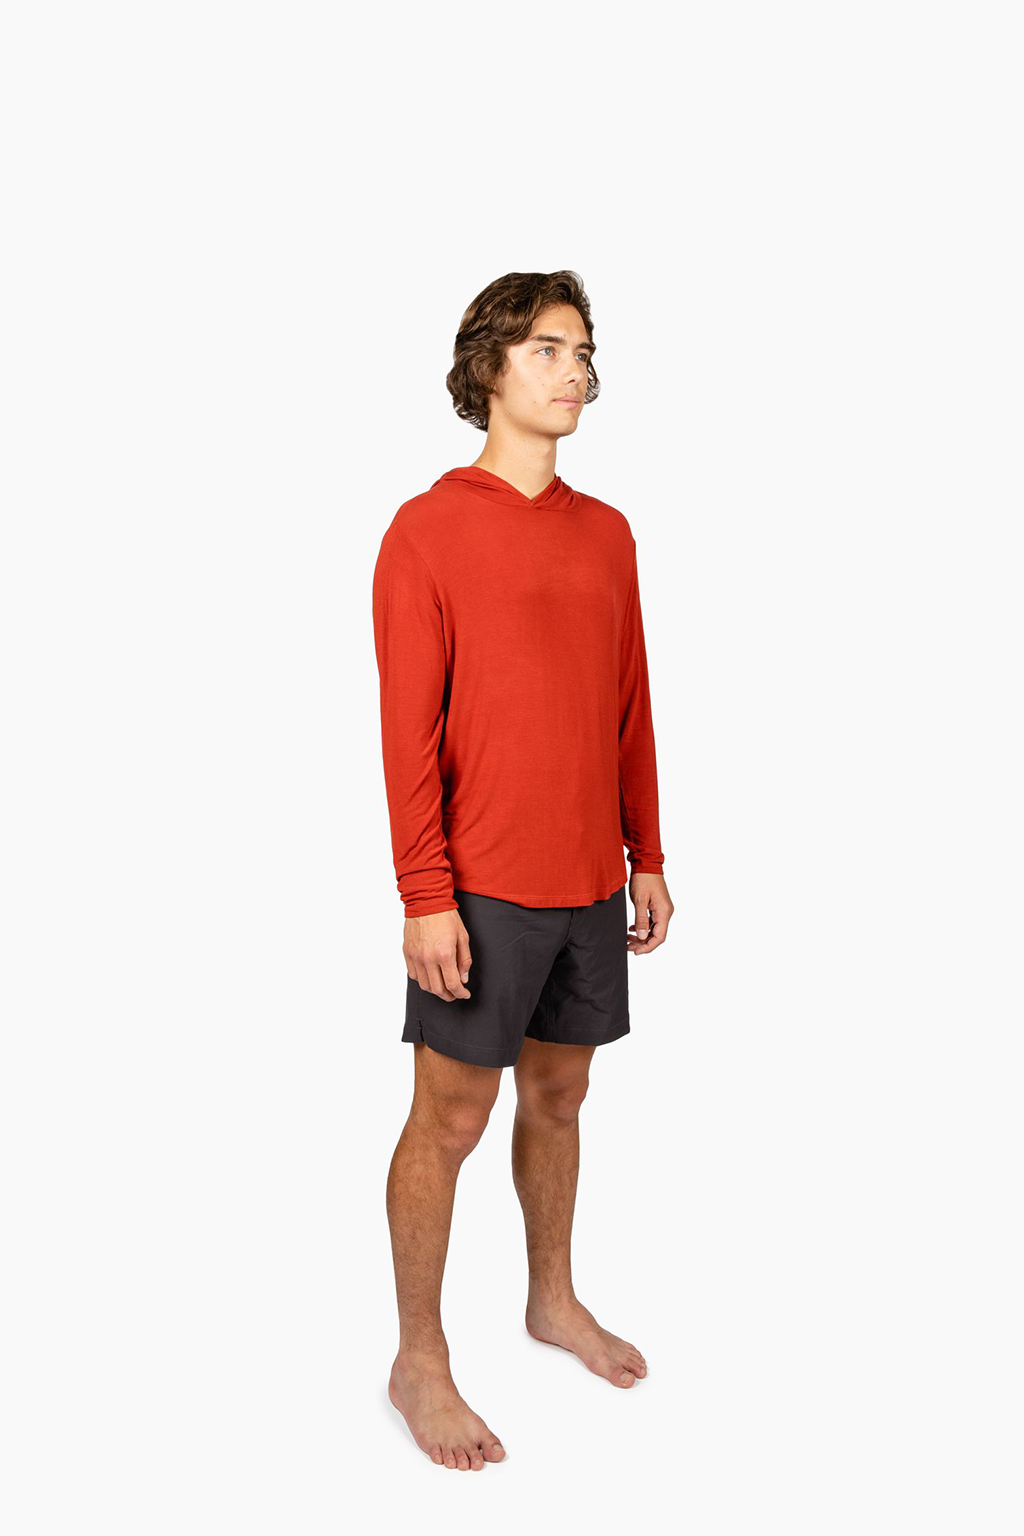 A man wearing a Red Sun Shirt with black shorts